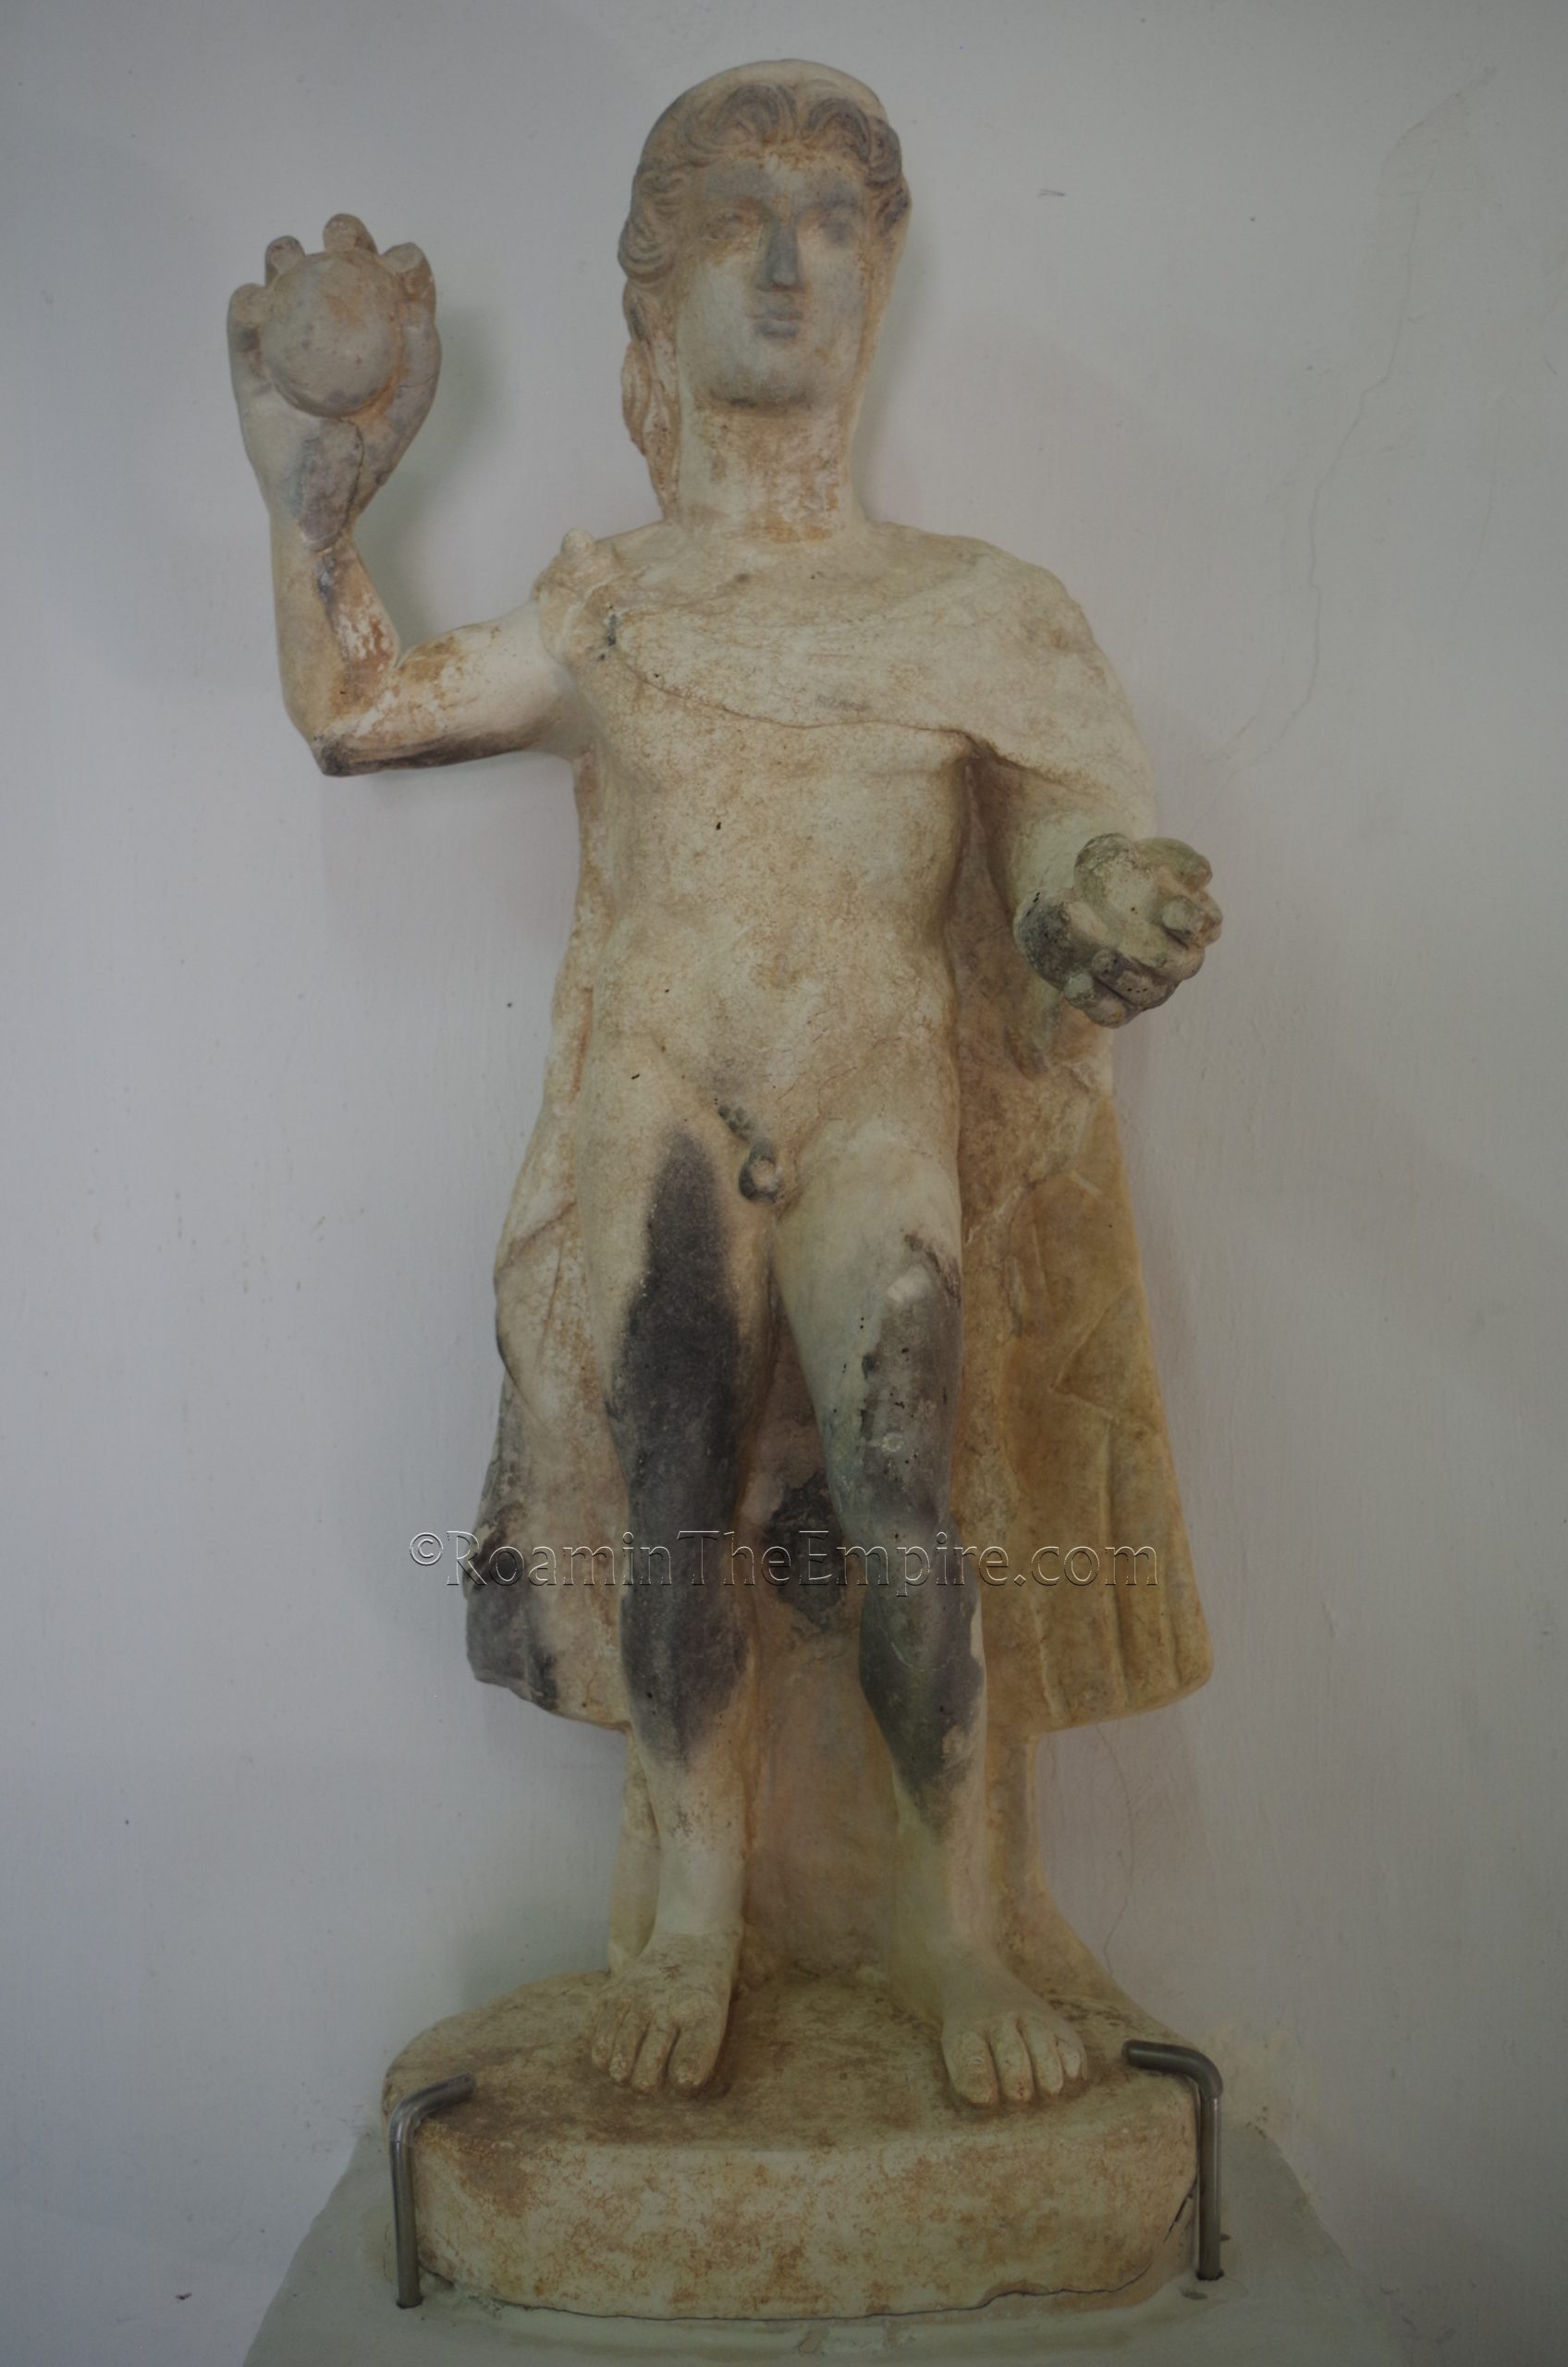 Statue of Apollo the Stone Thrower. From the Sanctuary of Apollo Hylates. Dated roughly to between 30 BCE and 330 CE. In the Local Archaeological Museum of Kourion.